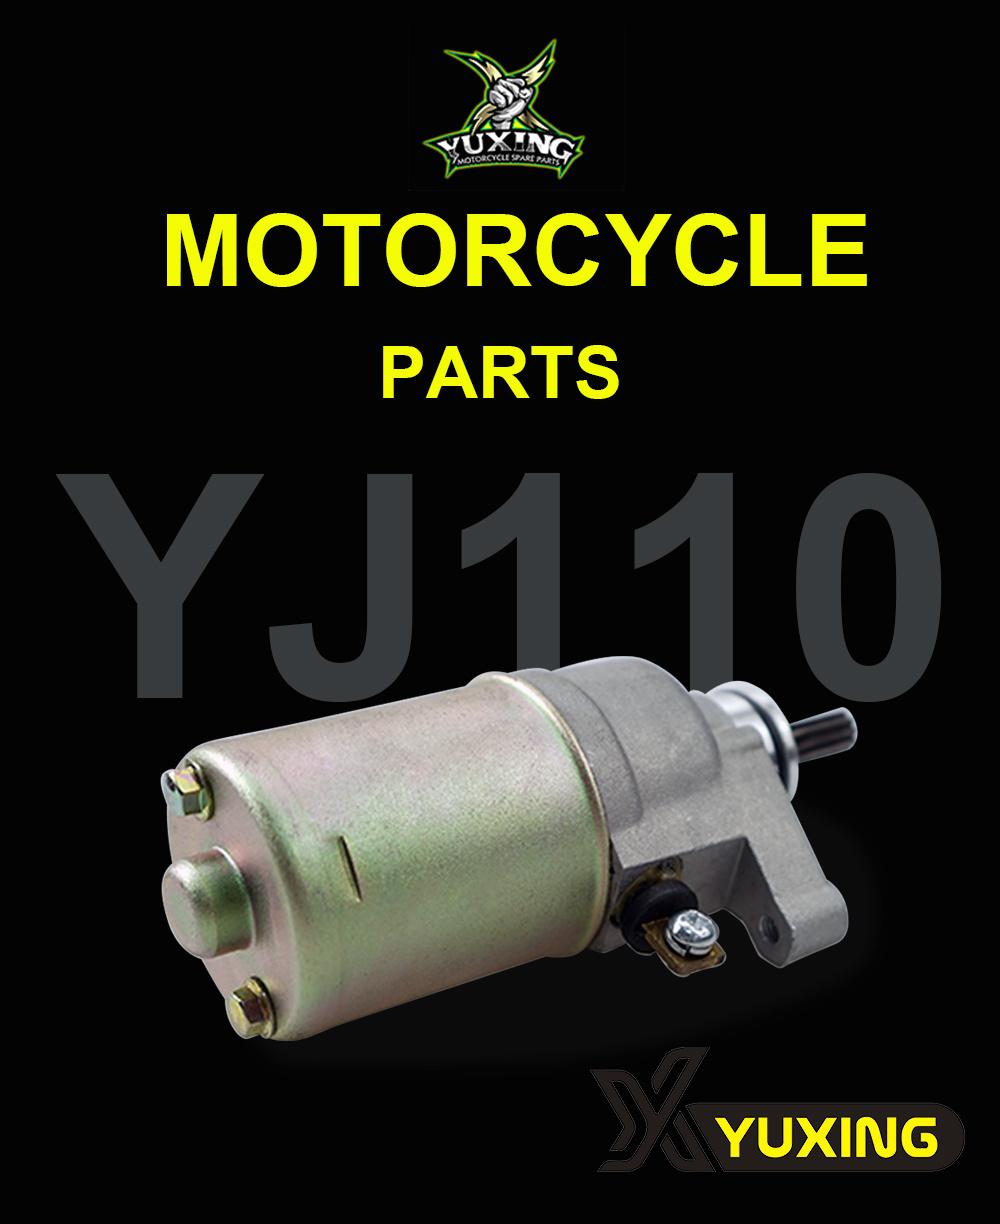 Starting Motor of Accesorios Motorcycle Parts